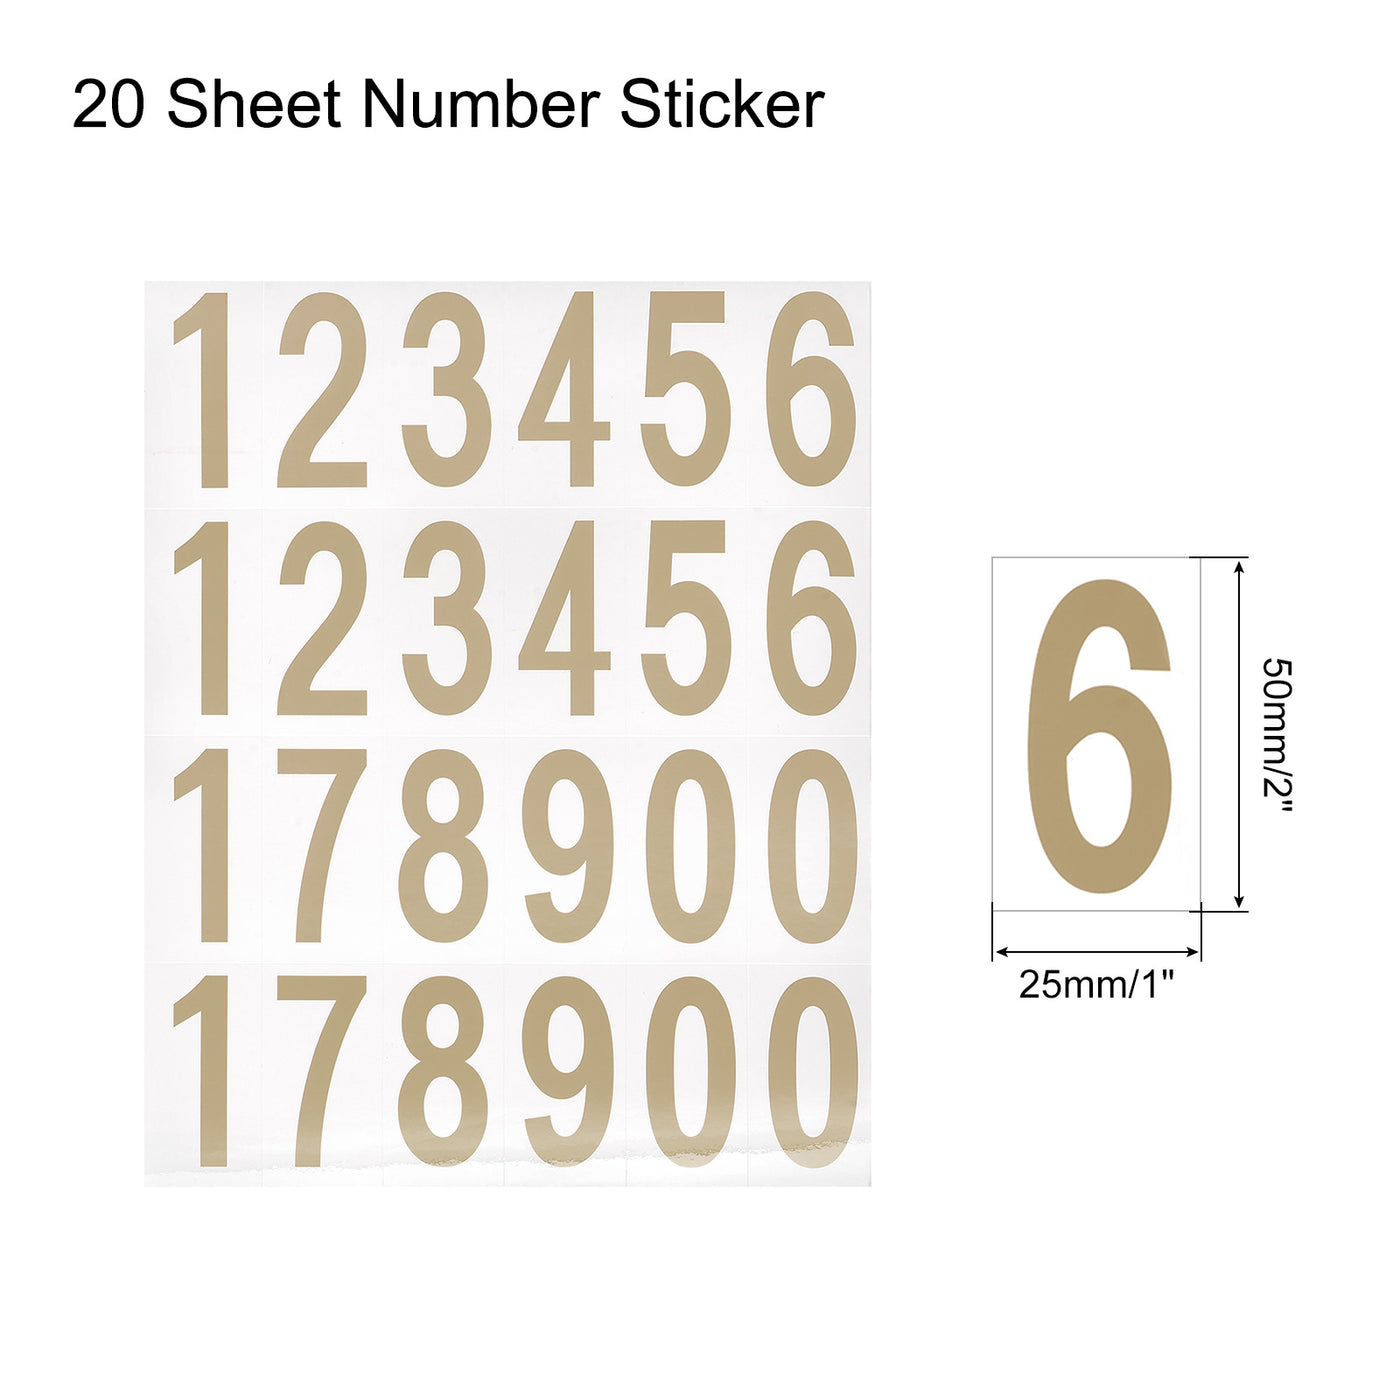 Harfington Number Stickers Mailbox Numbers Self Adhesive 12345178900 50x25mm Gold on White for Residence Mailbox Signs, 20 Sheets(480pcs)